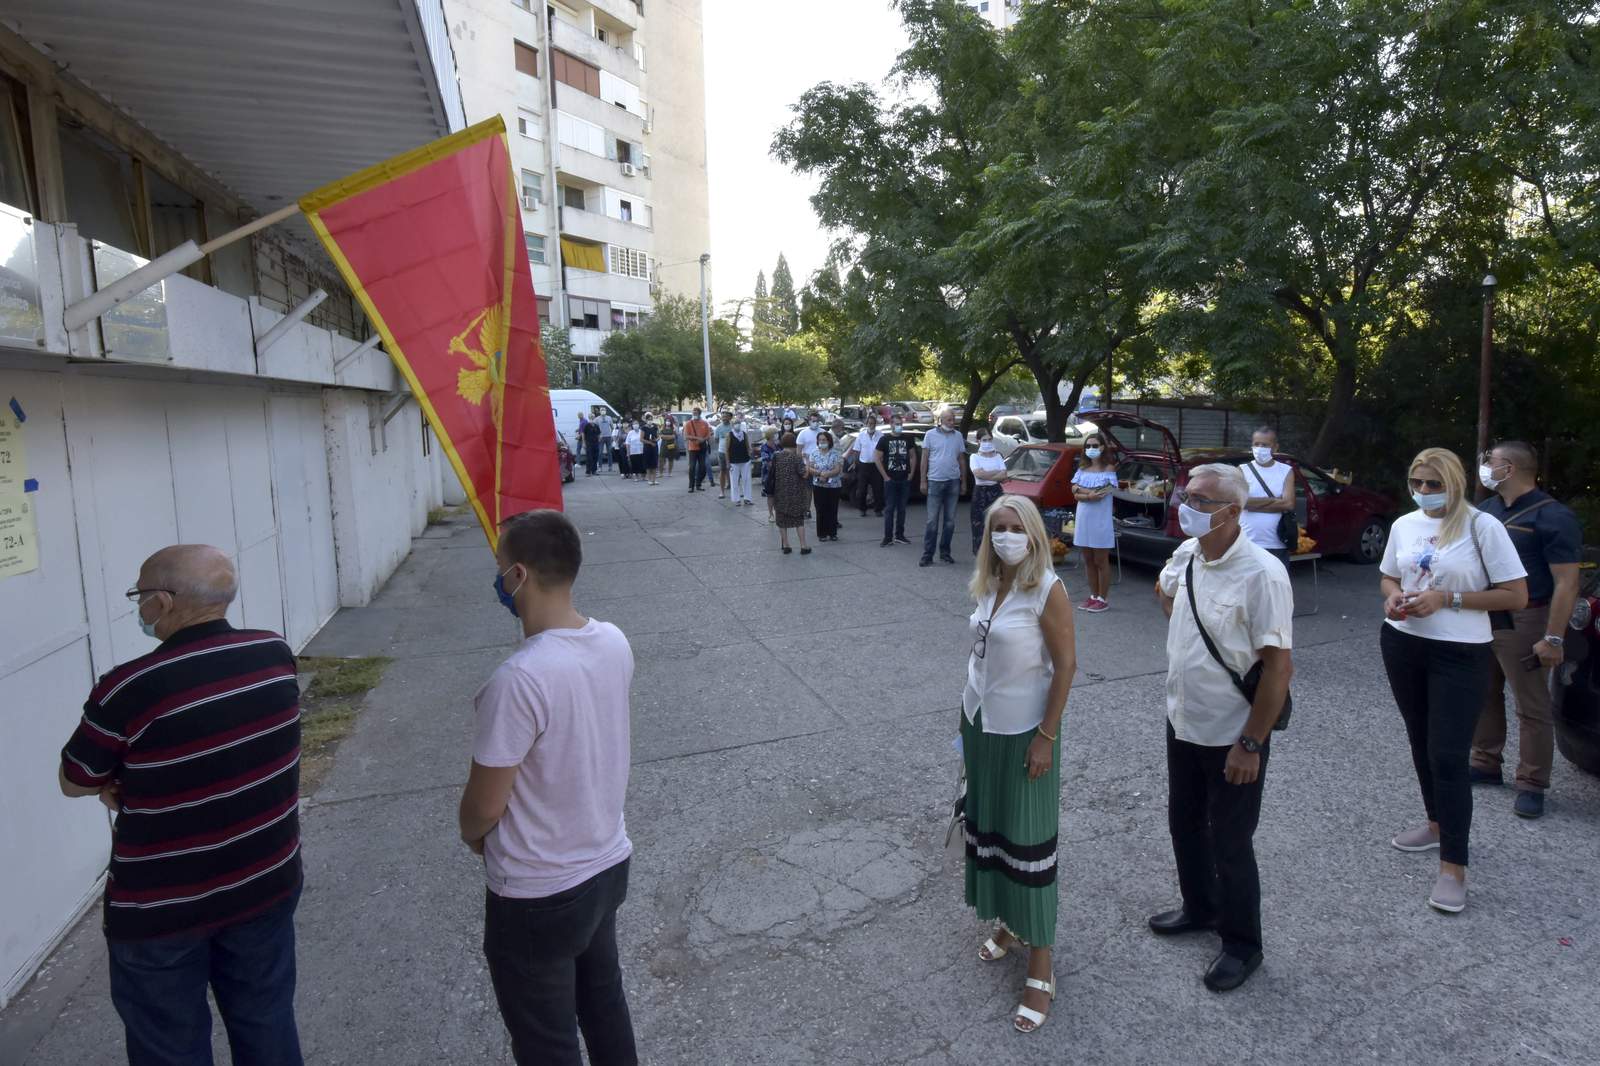 Montenegro opposition claims election victory in tight vote